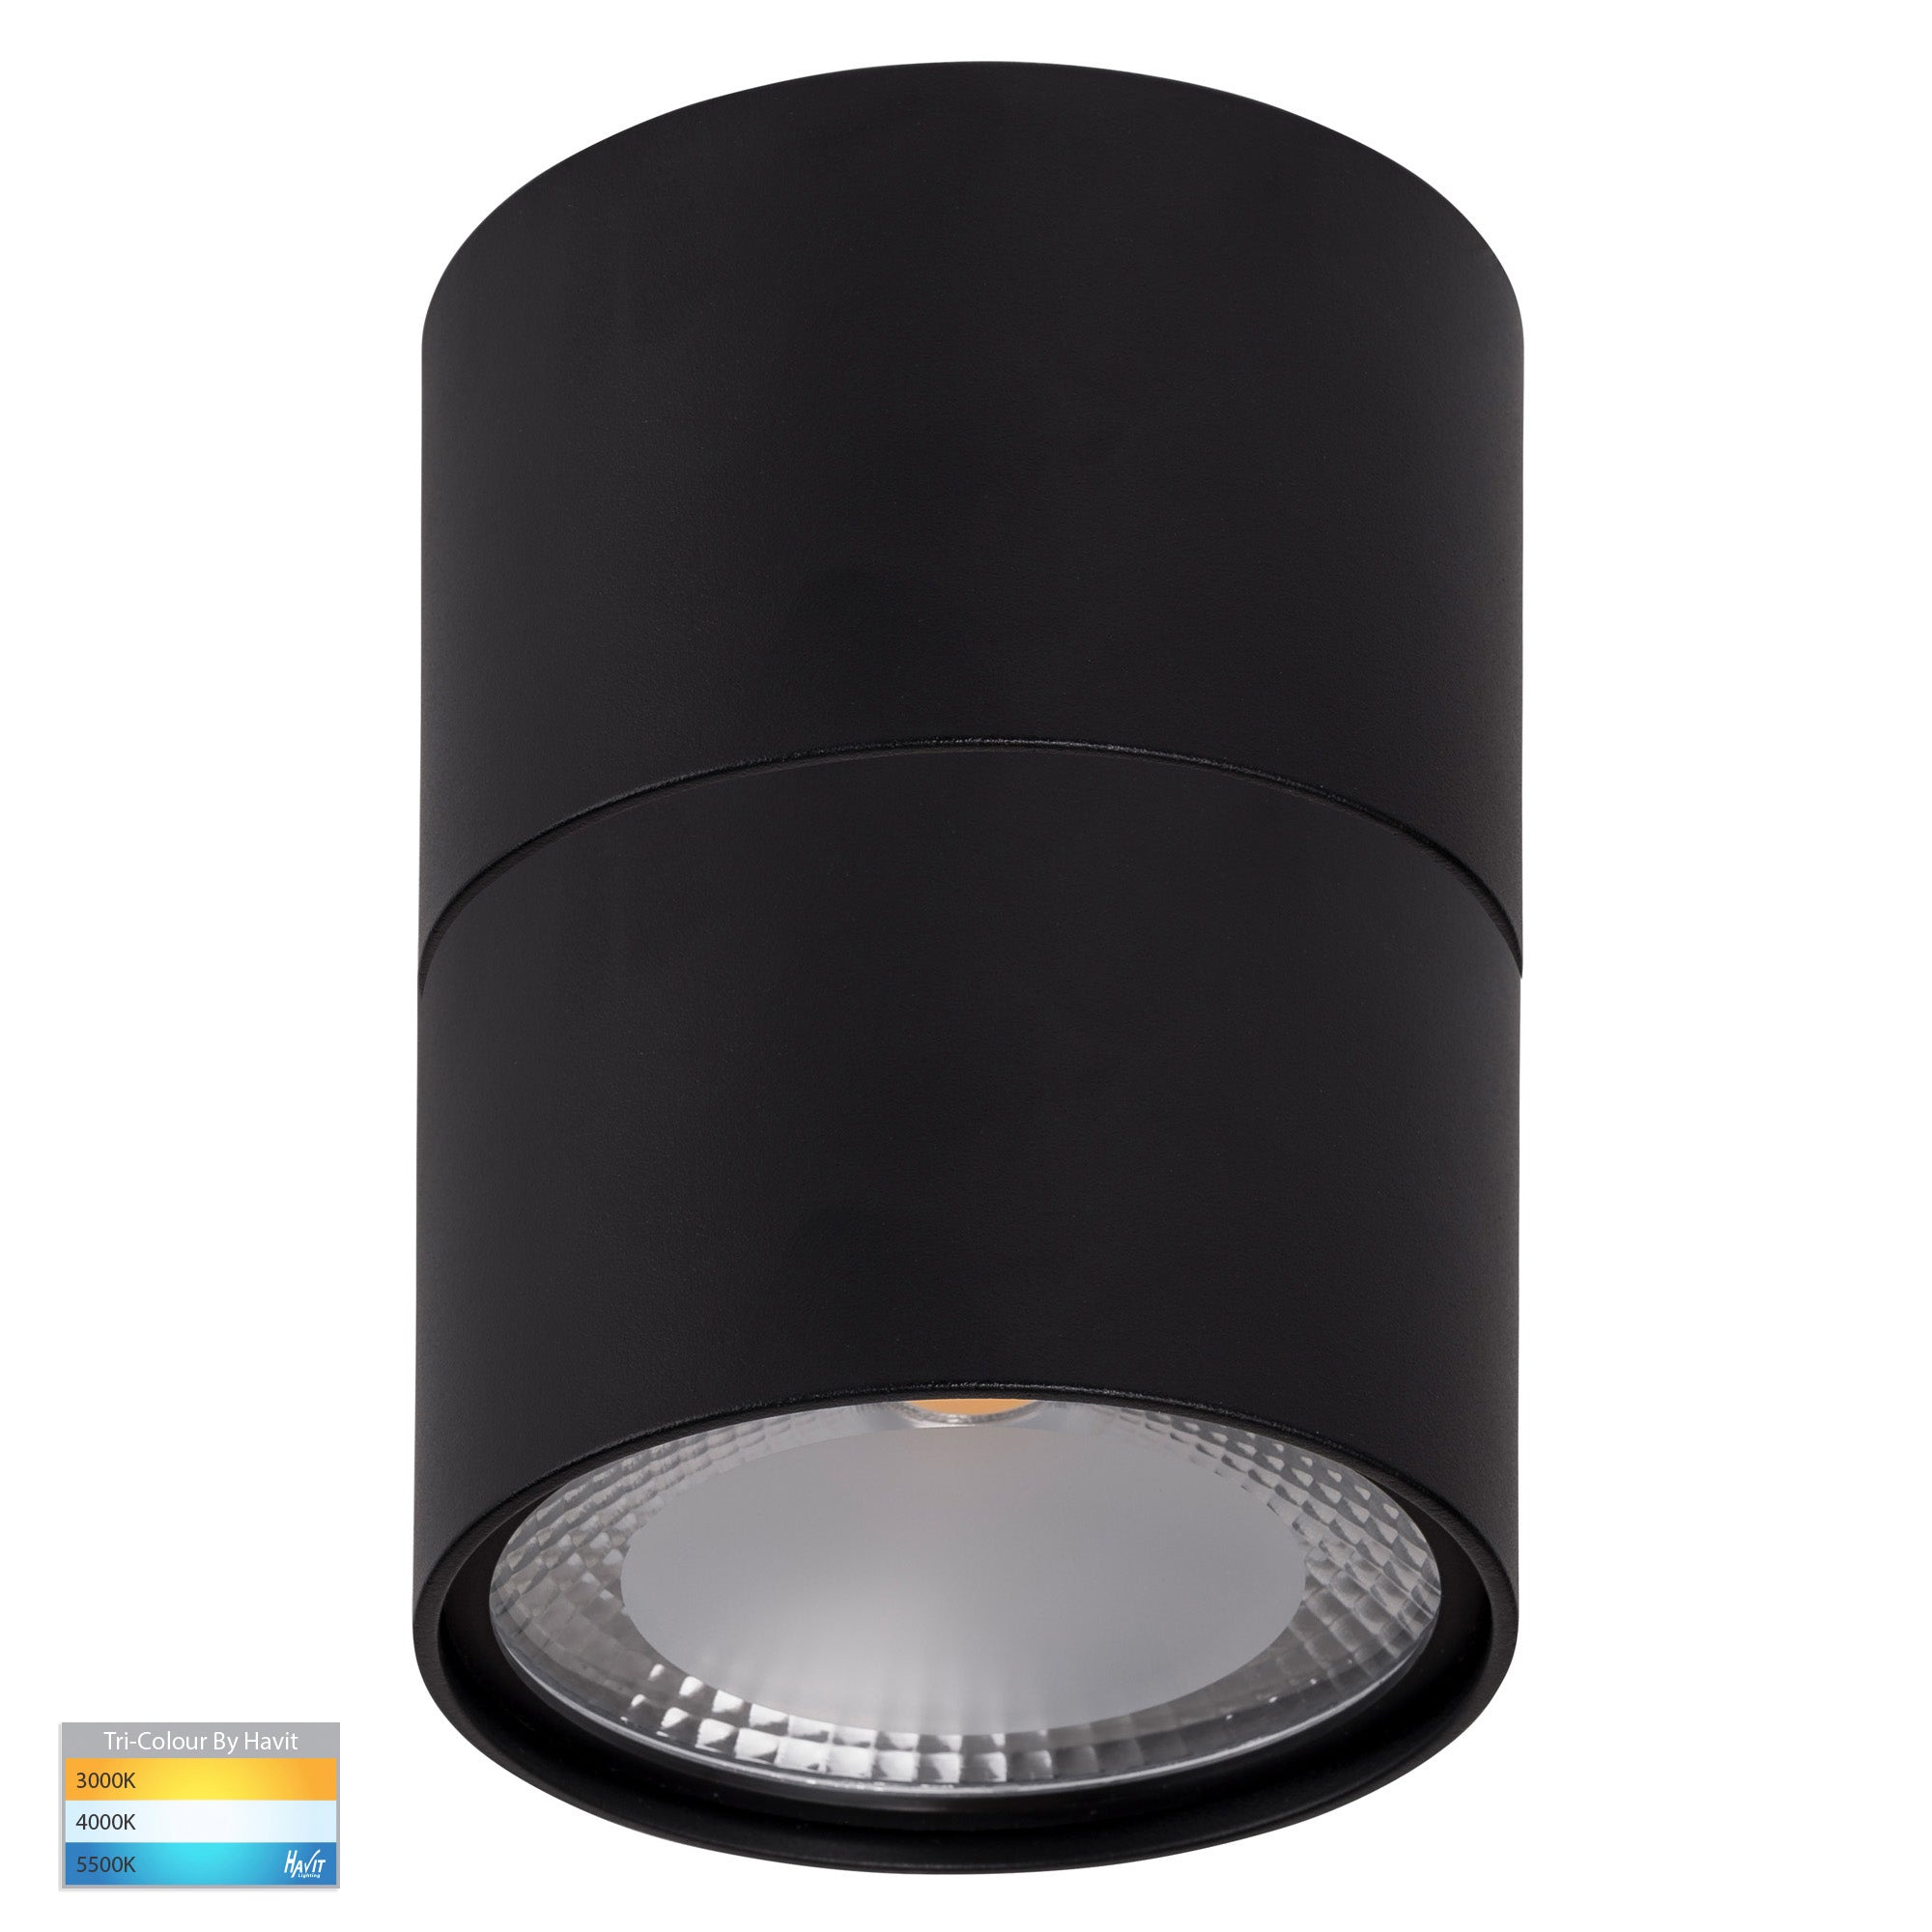 HV5803T-BLK-EXT | HV5803T-BLK-EXT-12V - Nella Black 12w Surface Mounted LED Downlight with Extension